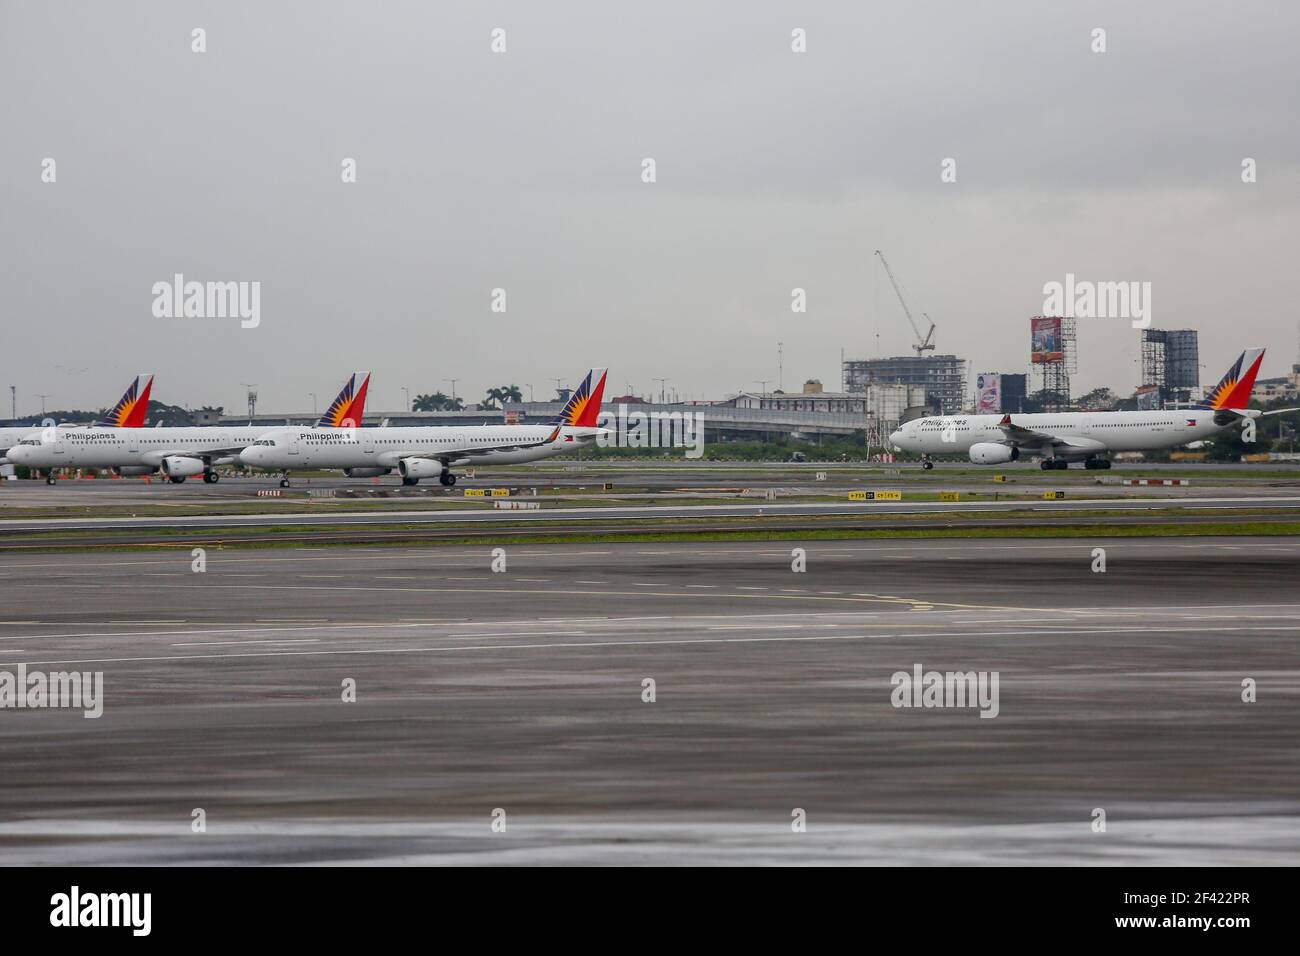 Philippine Airlines planes are seen parked on the tarmac of the Ninoy Aquino International Airport (NAIA) Terminal 2 in Pasay City, Metro Manila, Philippines. Stock Photo